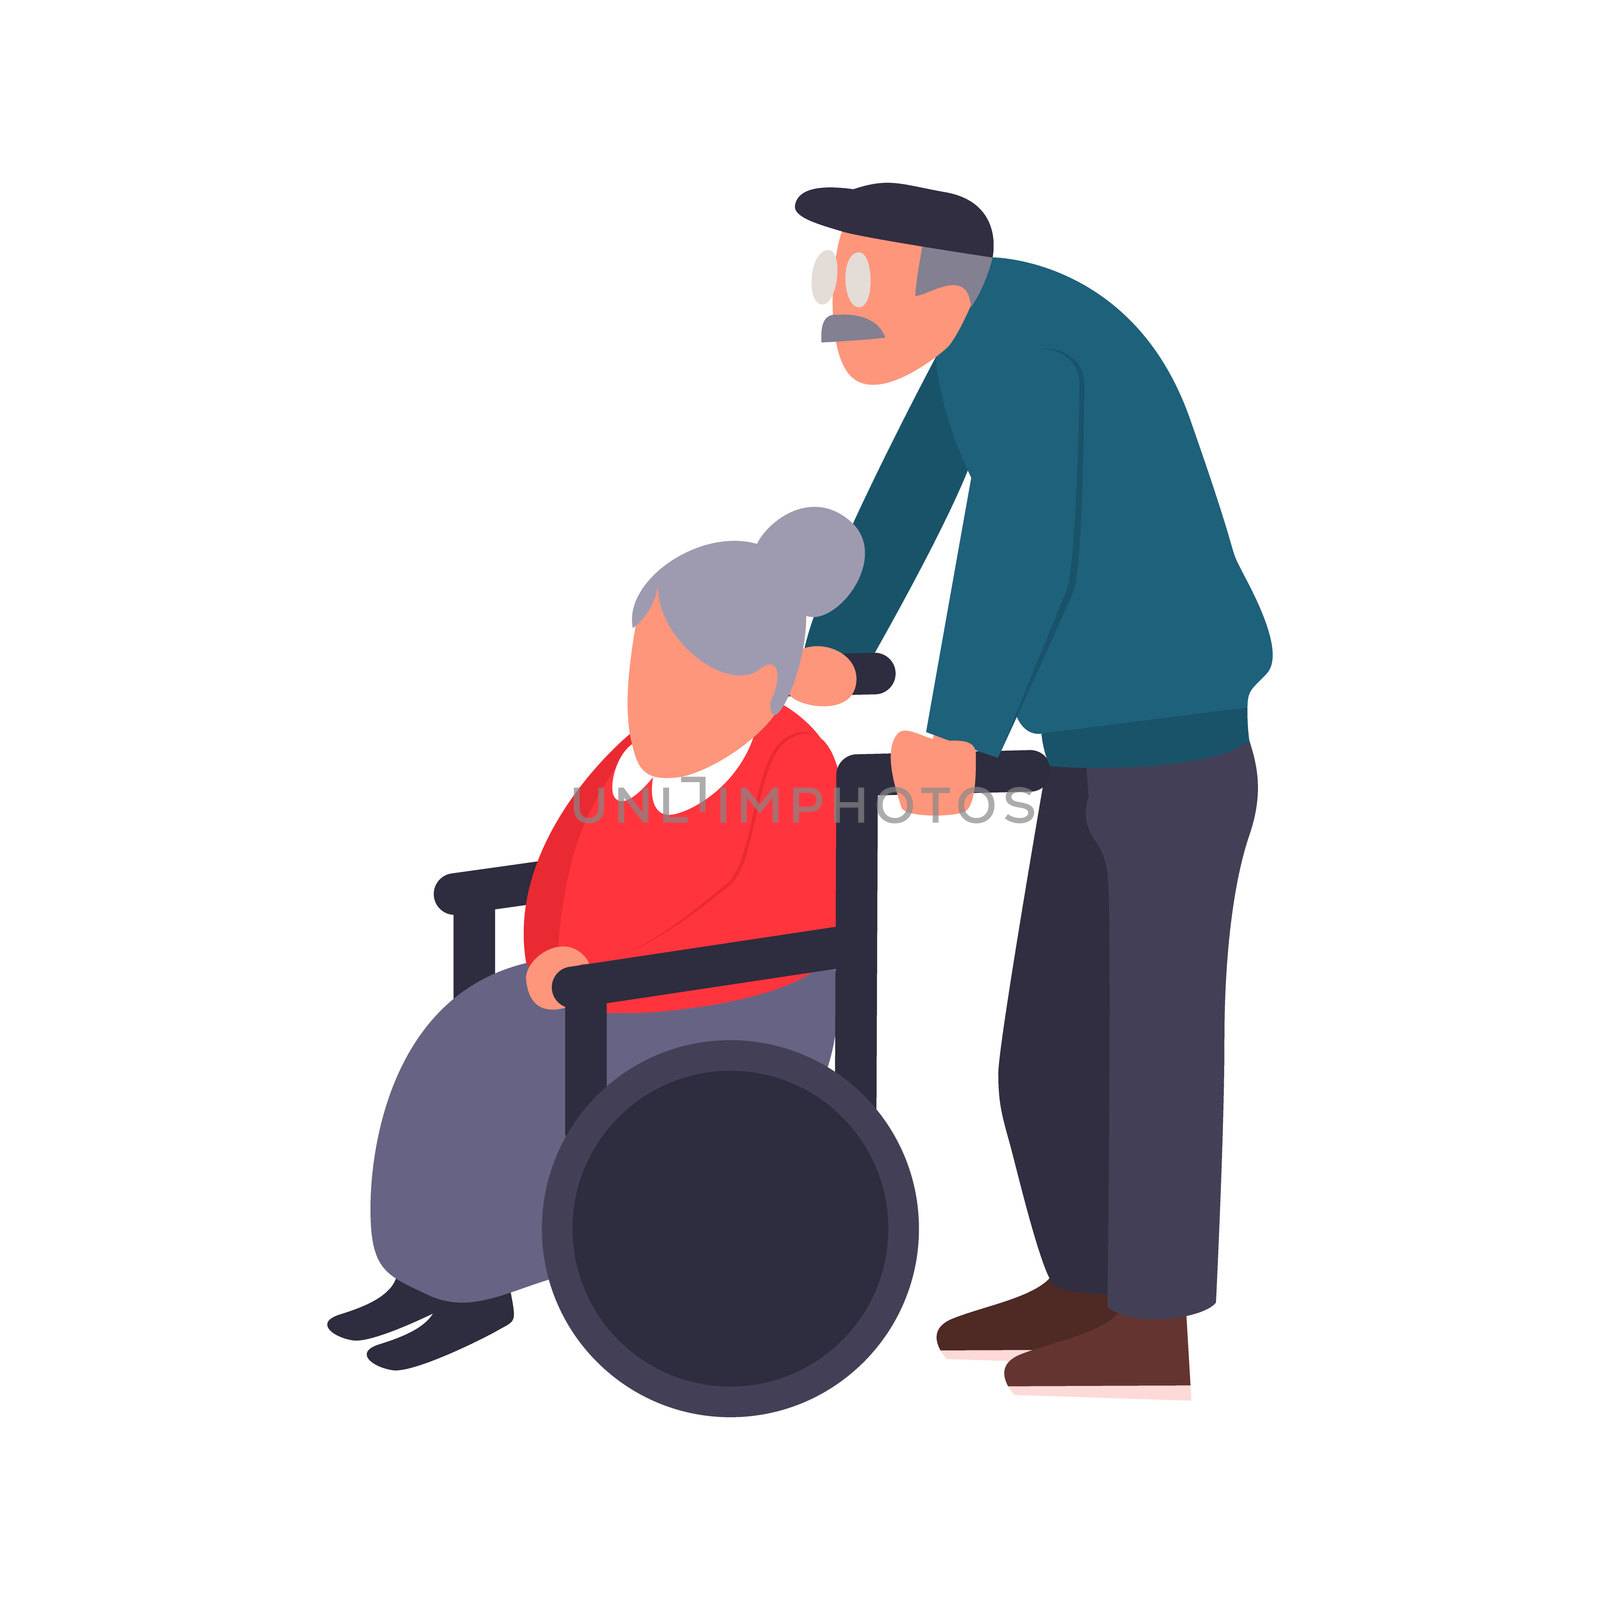 Mature couple on a walk. Care of a disabled person. Old man carries an elderly woman in a wheelchair. Cartoon illustration of senior couple